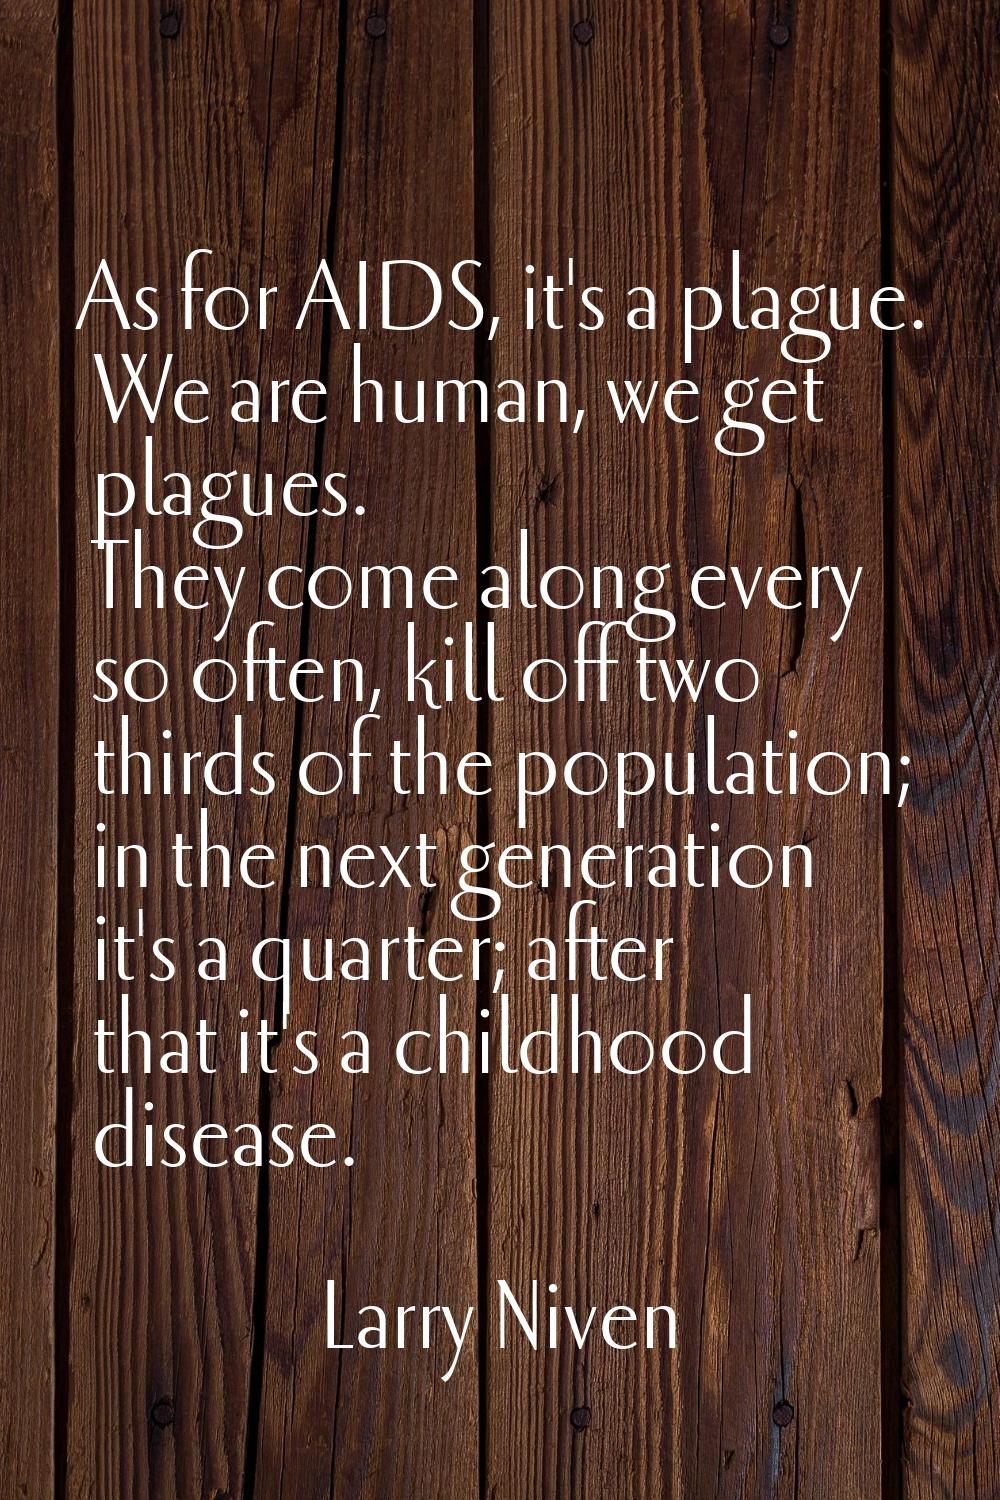 As for AIDS, it's a plague. We are human, we get plagues. They come along every so often, kill off 